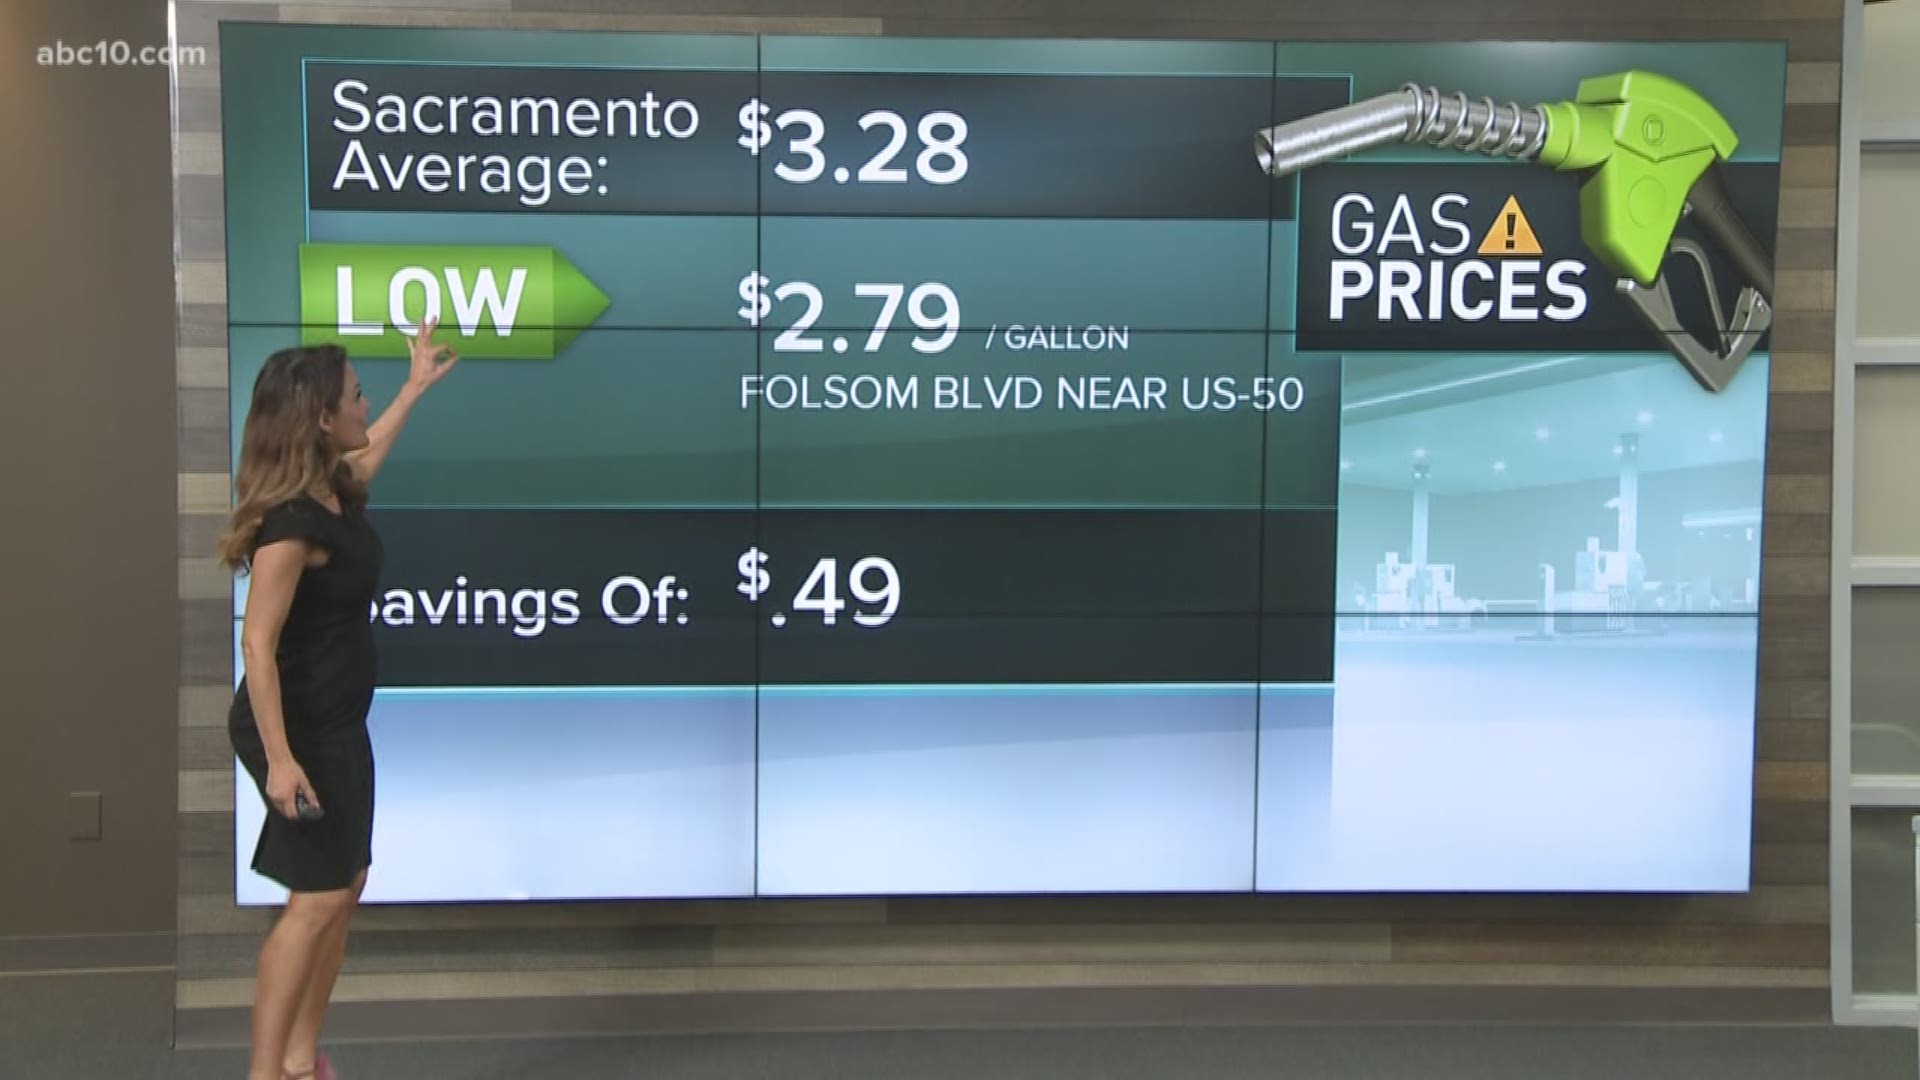 In today's Begley's Bargains, Brittany shows where drivers can find some big savings at the gas pump, including a gas station on Folsom Blvd. at just $2.79!